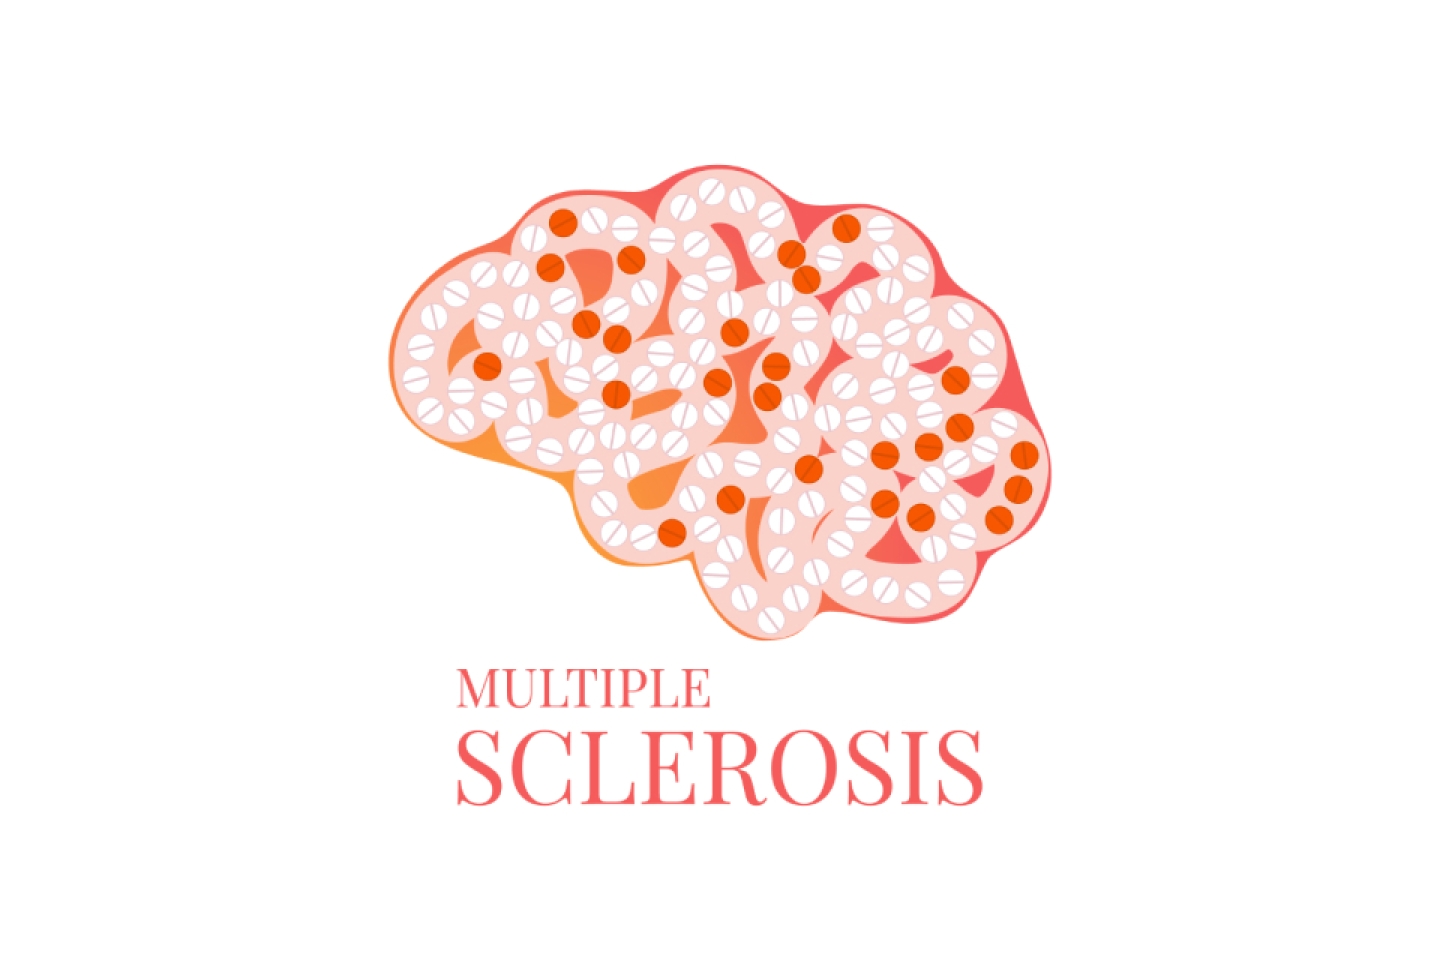 Multiple sclerosis awareness poster with brain made of pills on white background.